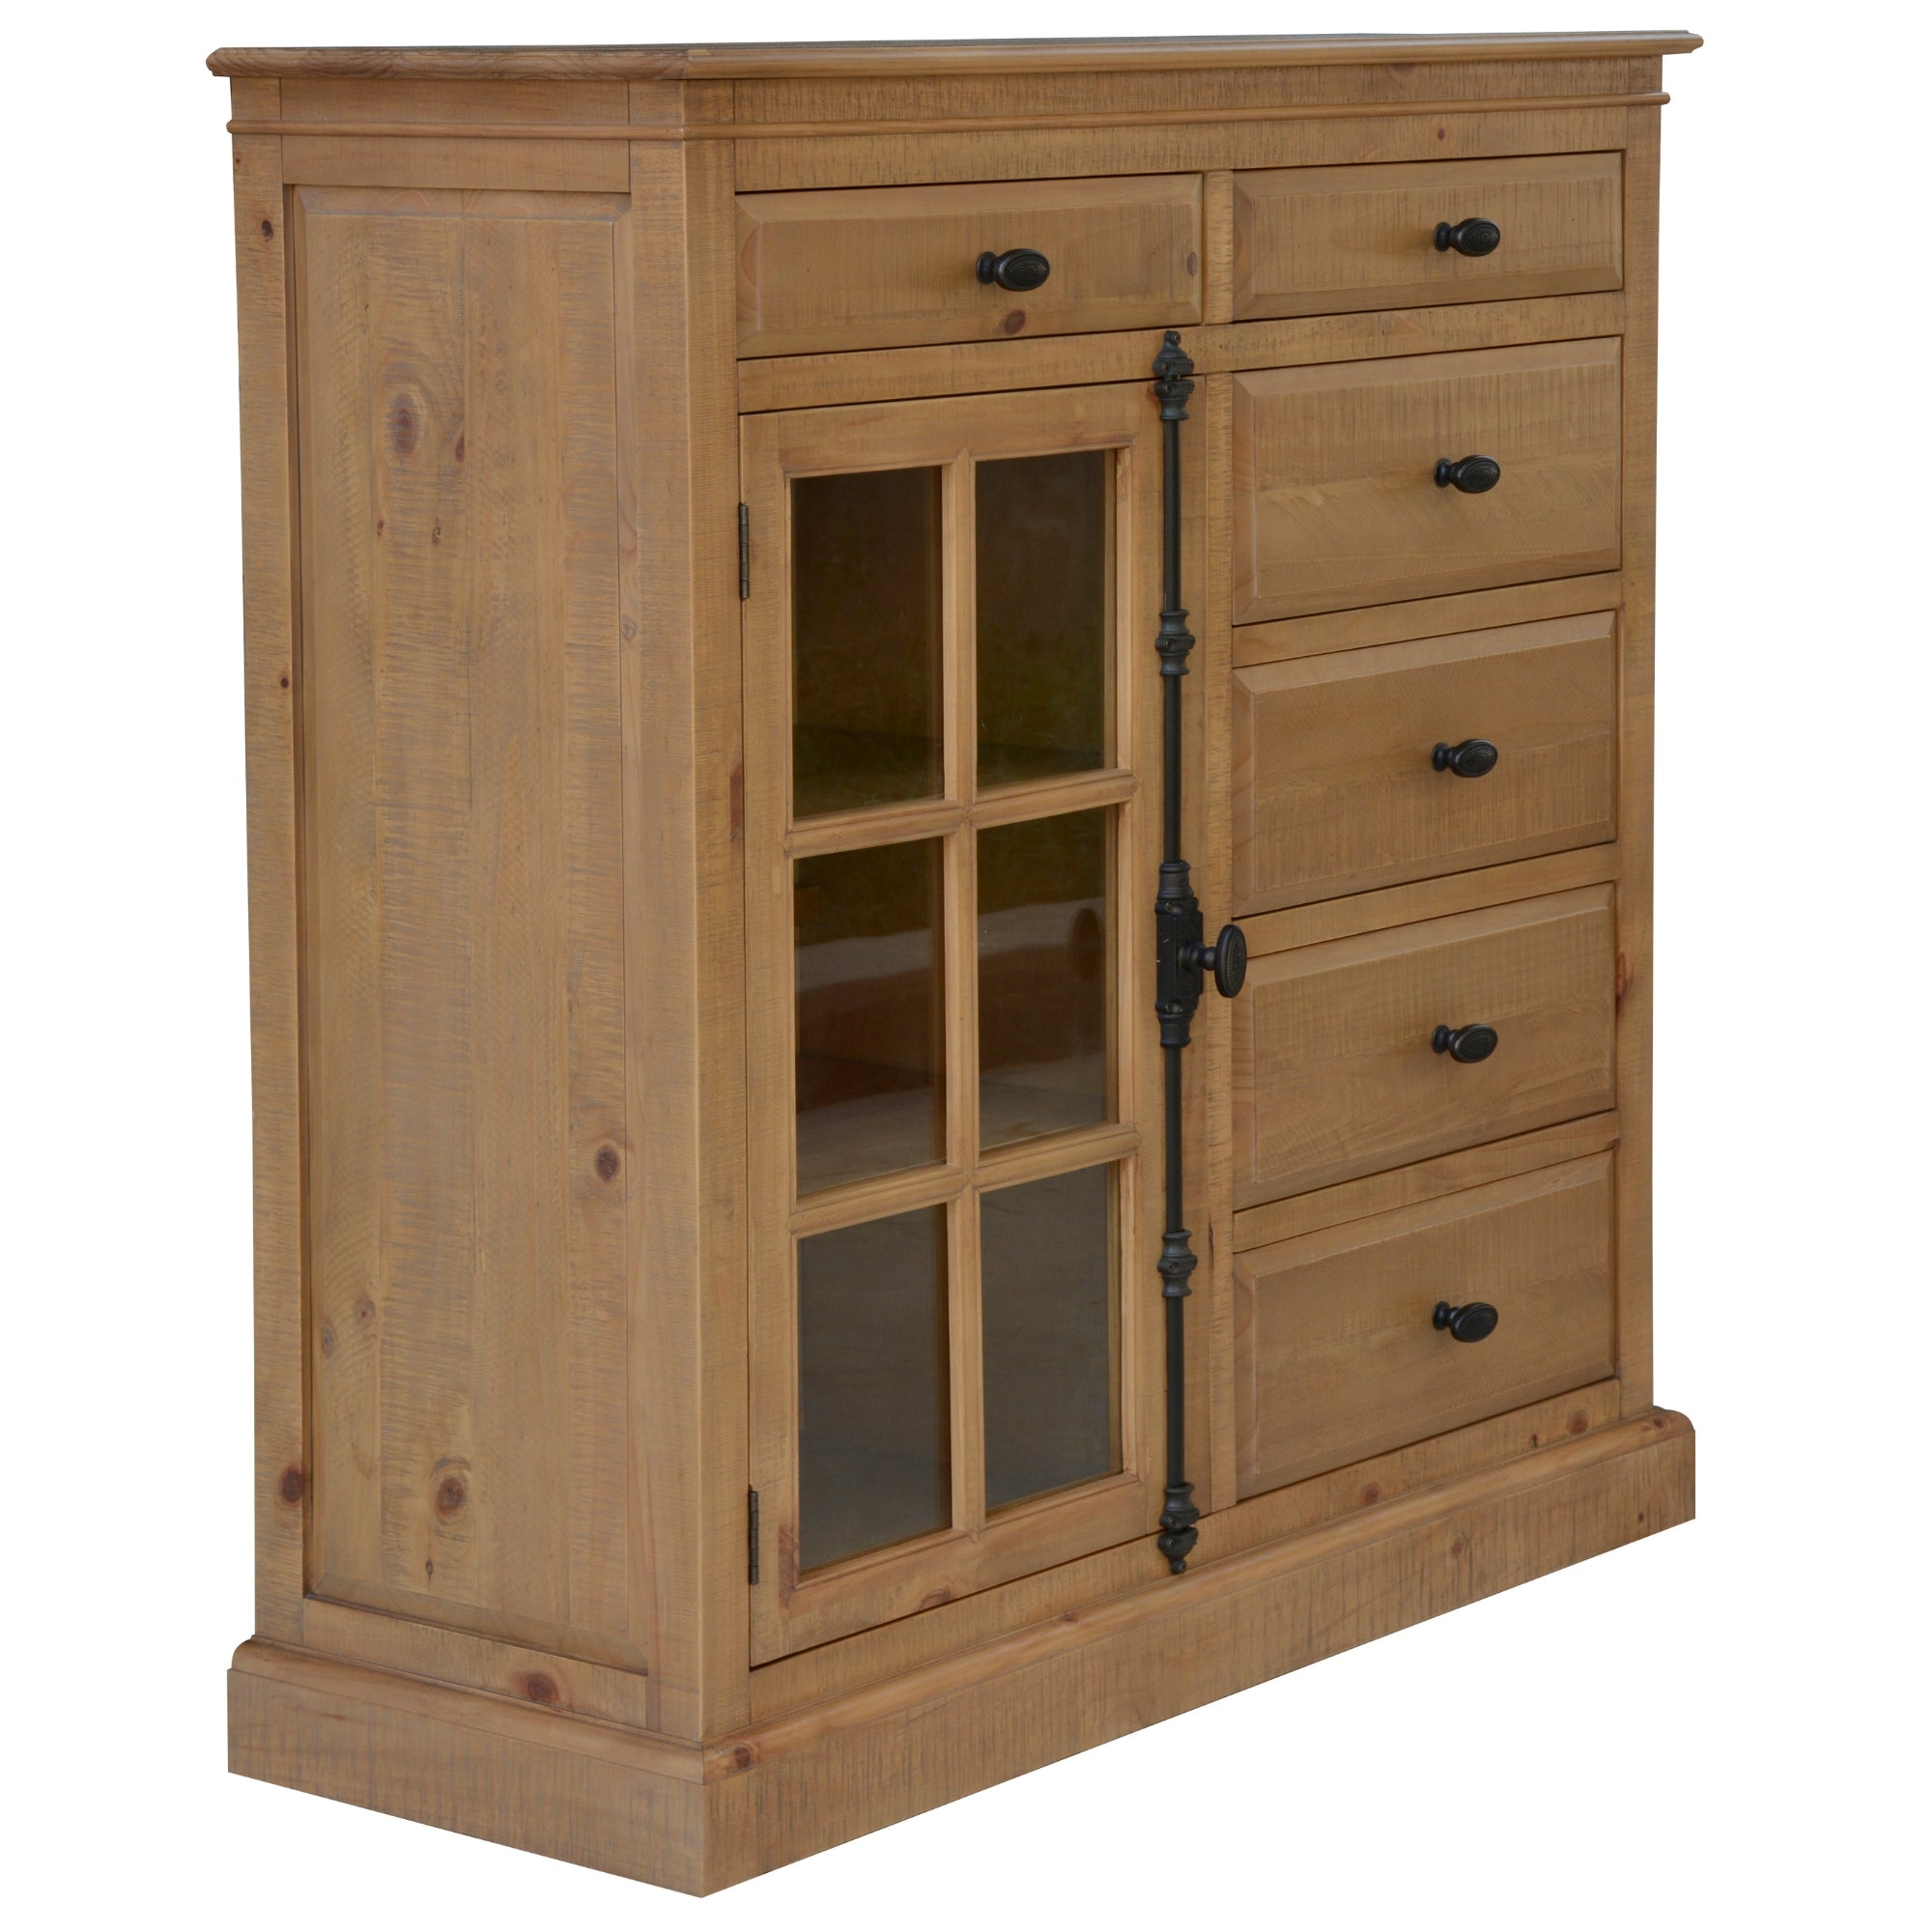 Rustic Pine King Bed Suite with Tallboy & Bedside Tables